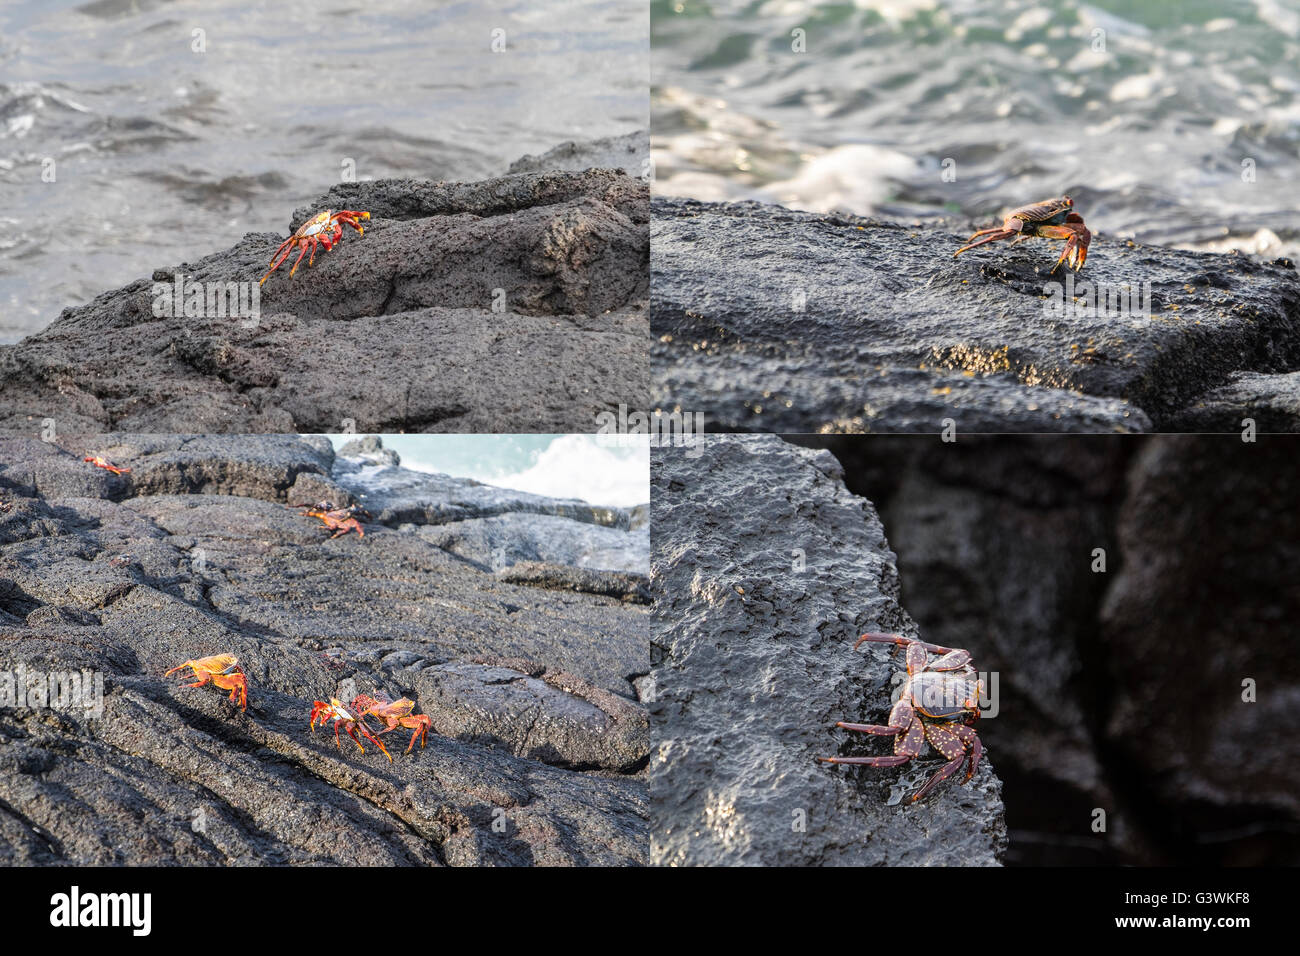 Collection of images of the colorful Sally Lightfoot Crab (Percnon gibbesi) in the Galapagos Islands Stock Photo